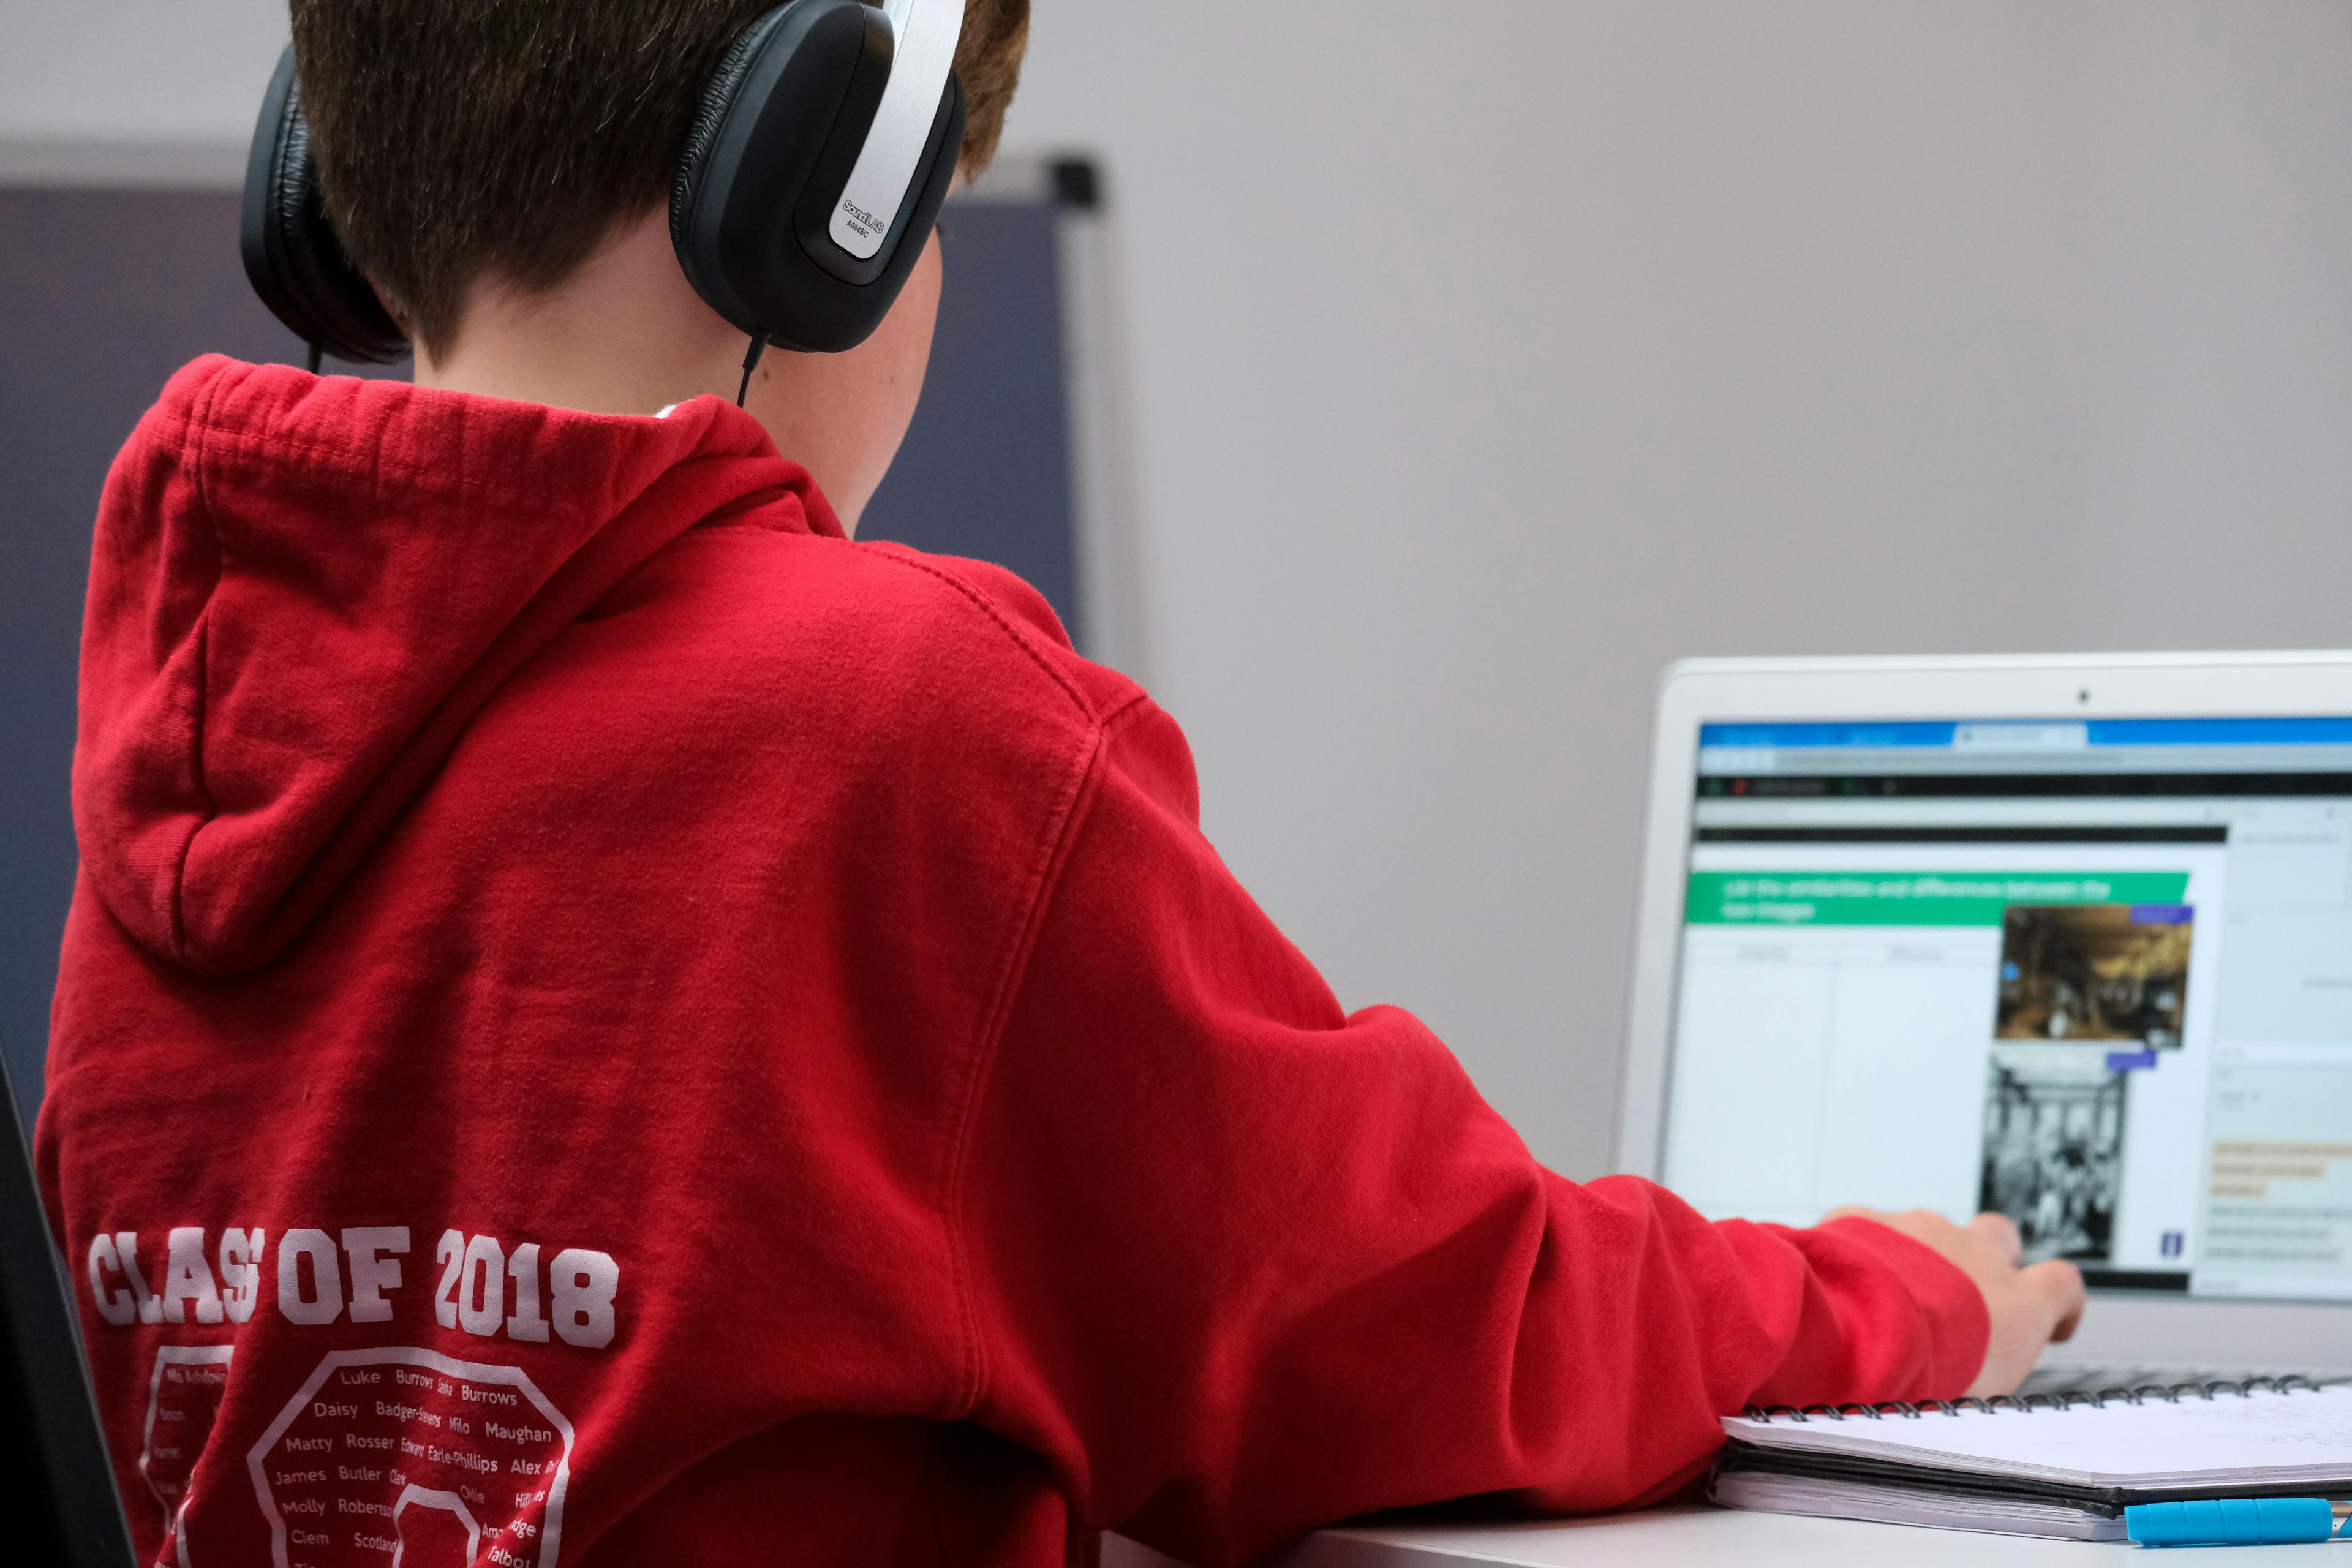 Boy working on school work with laptop and headphones